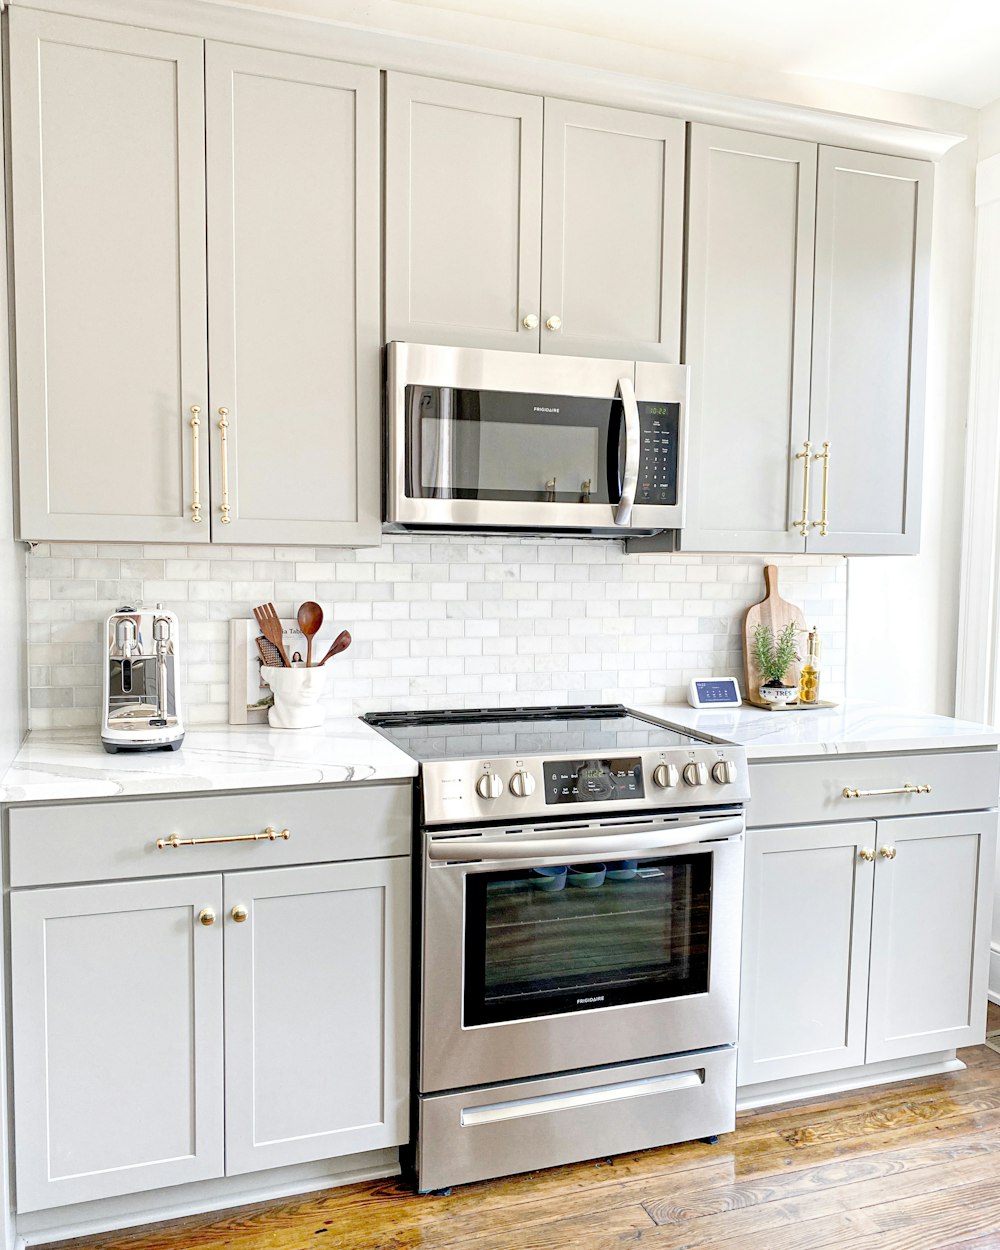 Kitchen Cabinets - Buy The Best Cabinets at Best Online Cabinets